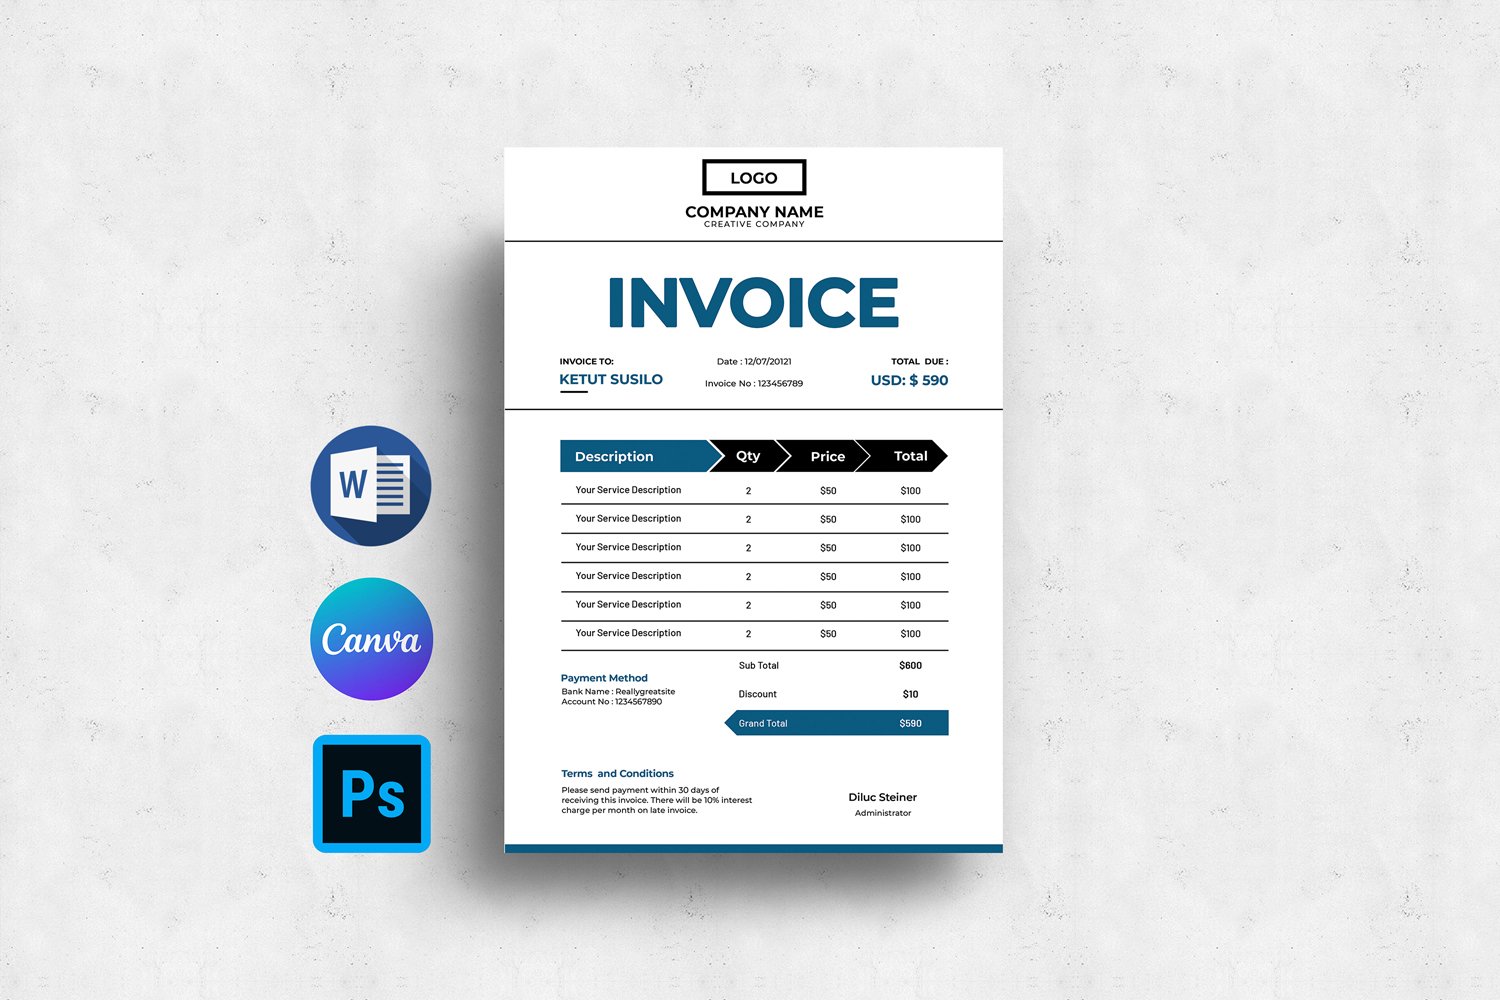 Template #381141 Invoice Template Webdesign Template - Logo template Preview